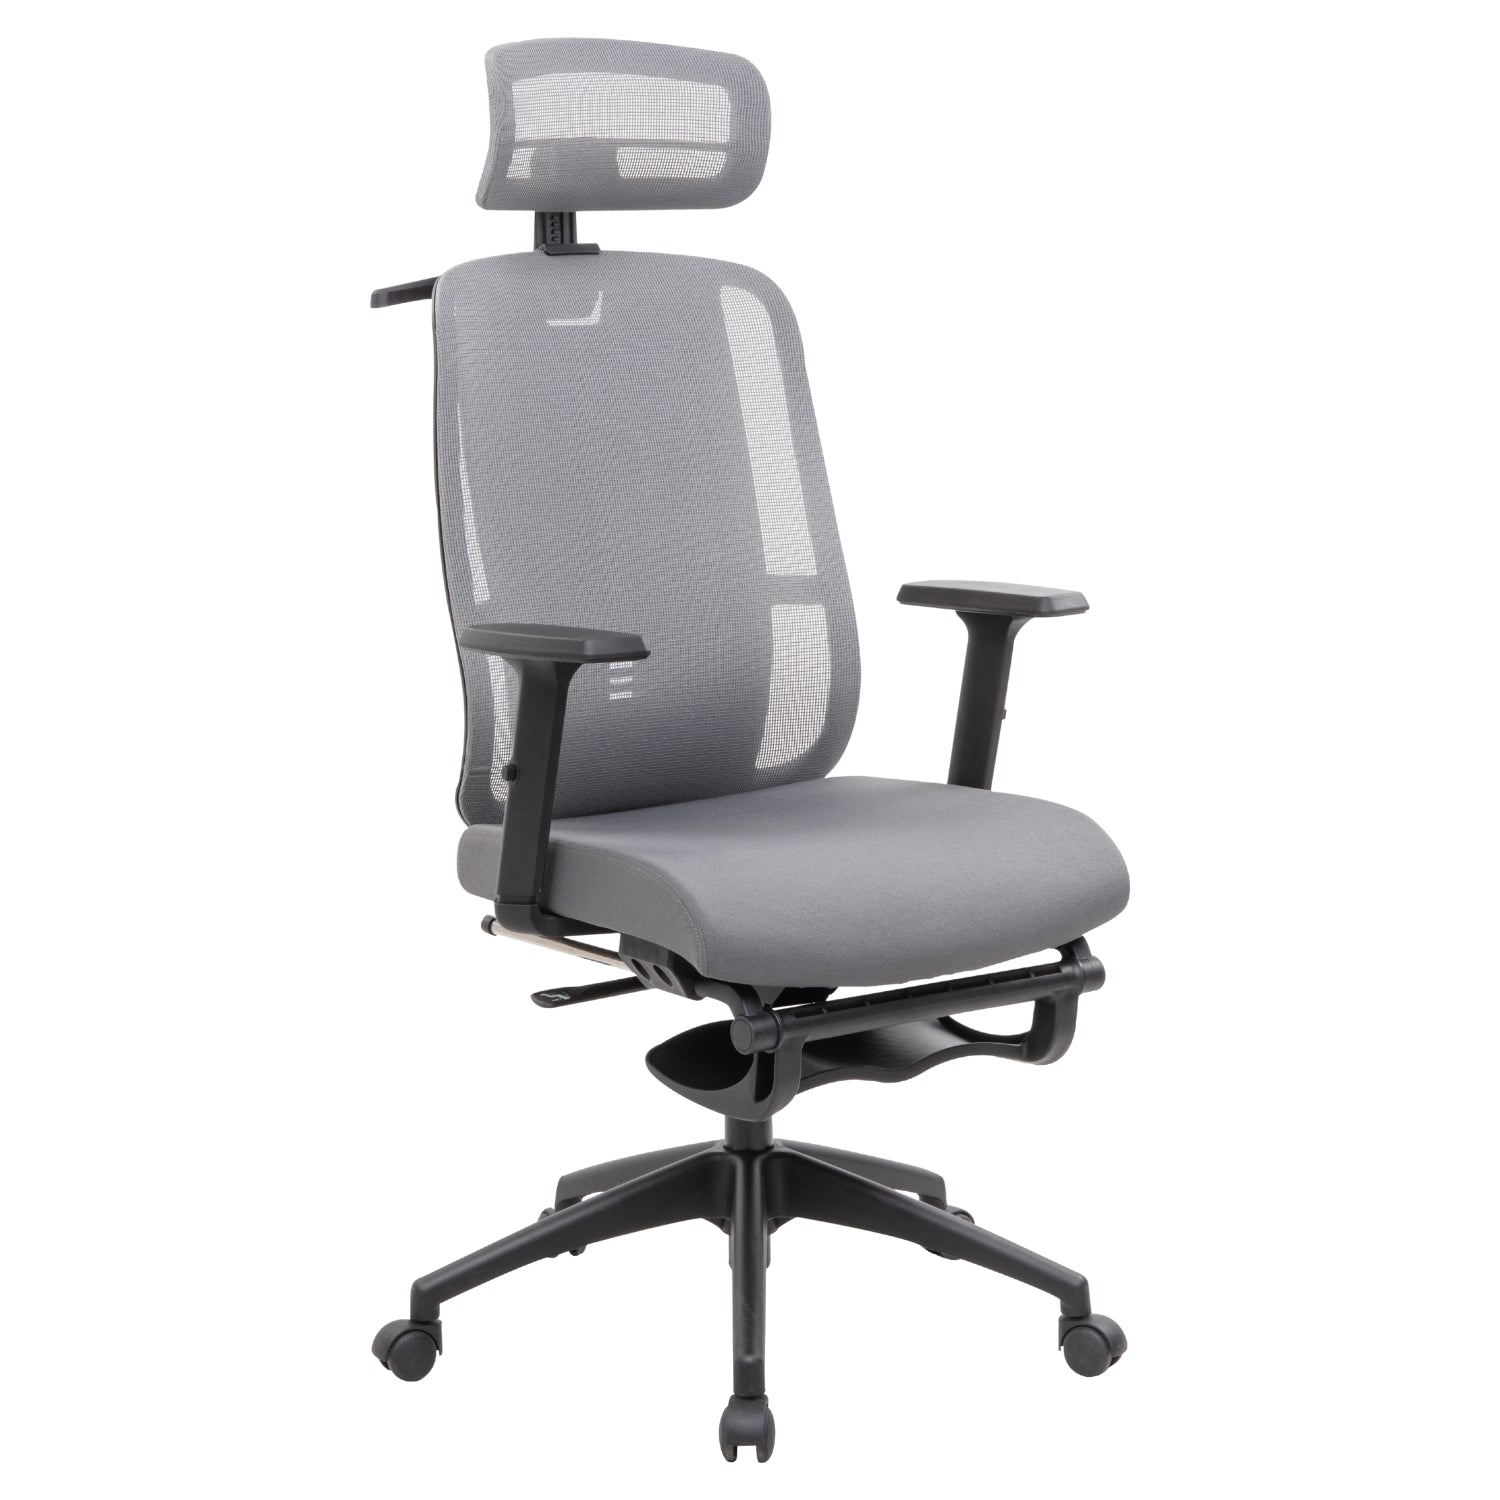 Kyona mesh office adjustable task chair with clothing hanger foot rest adjustable headrest lumbar support and armrest.